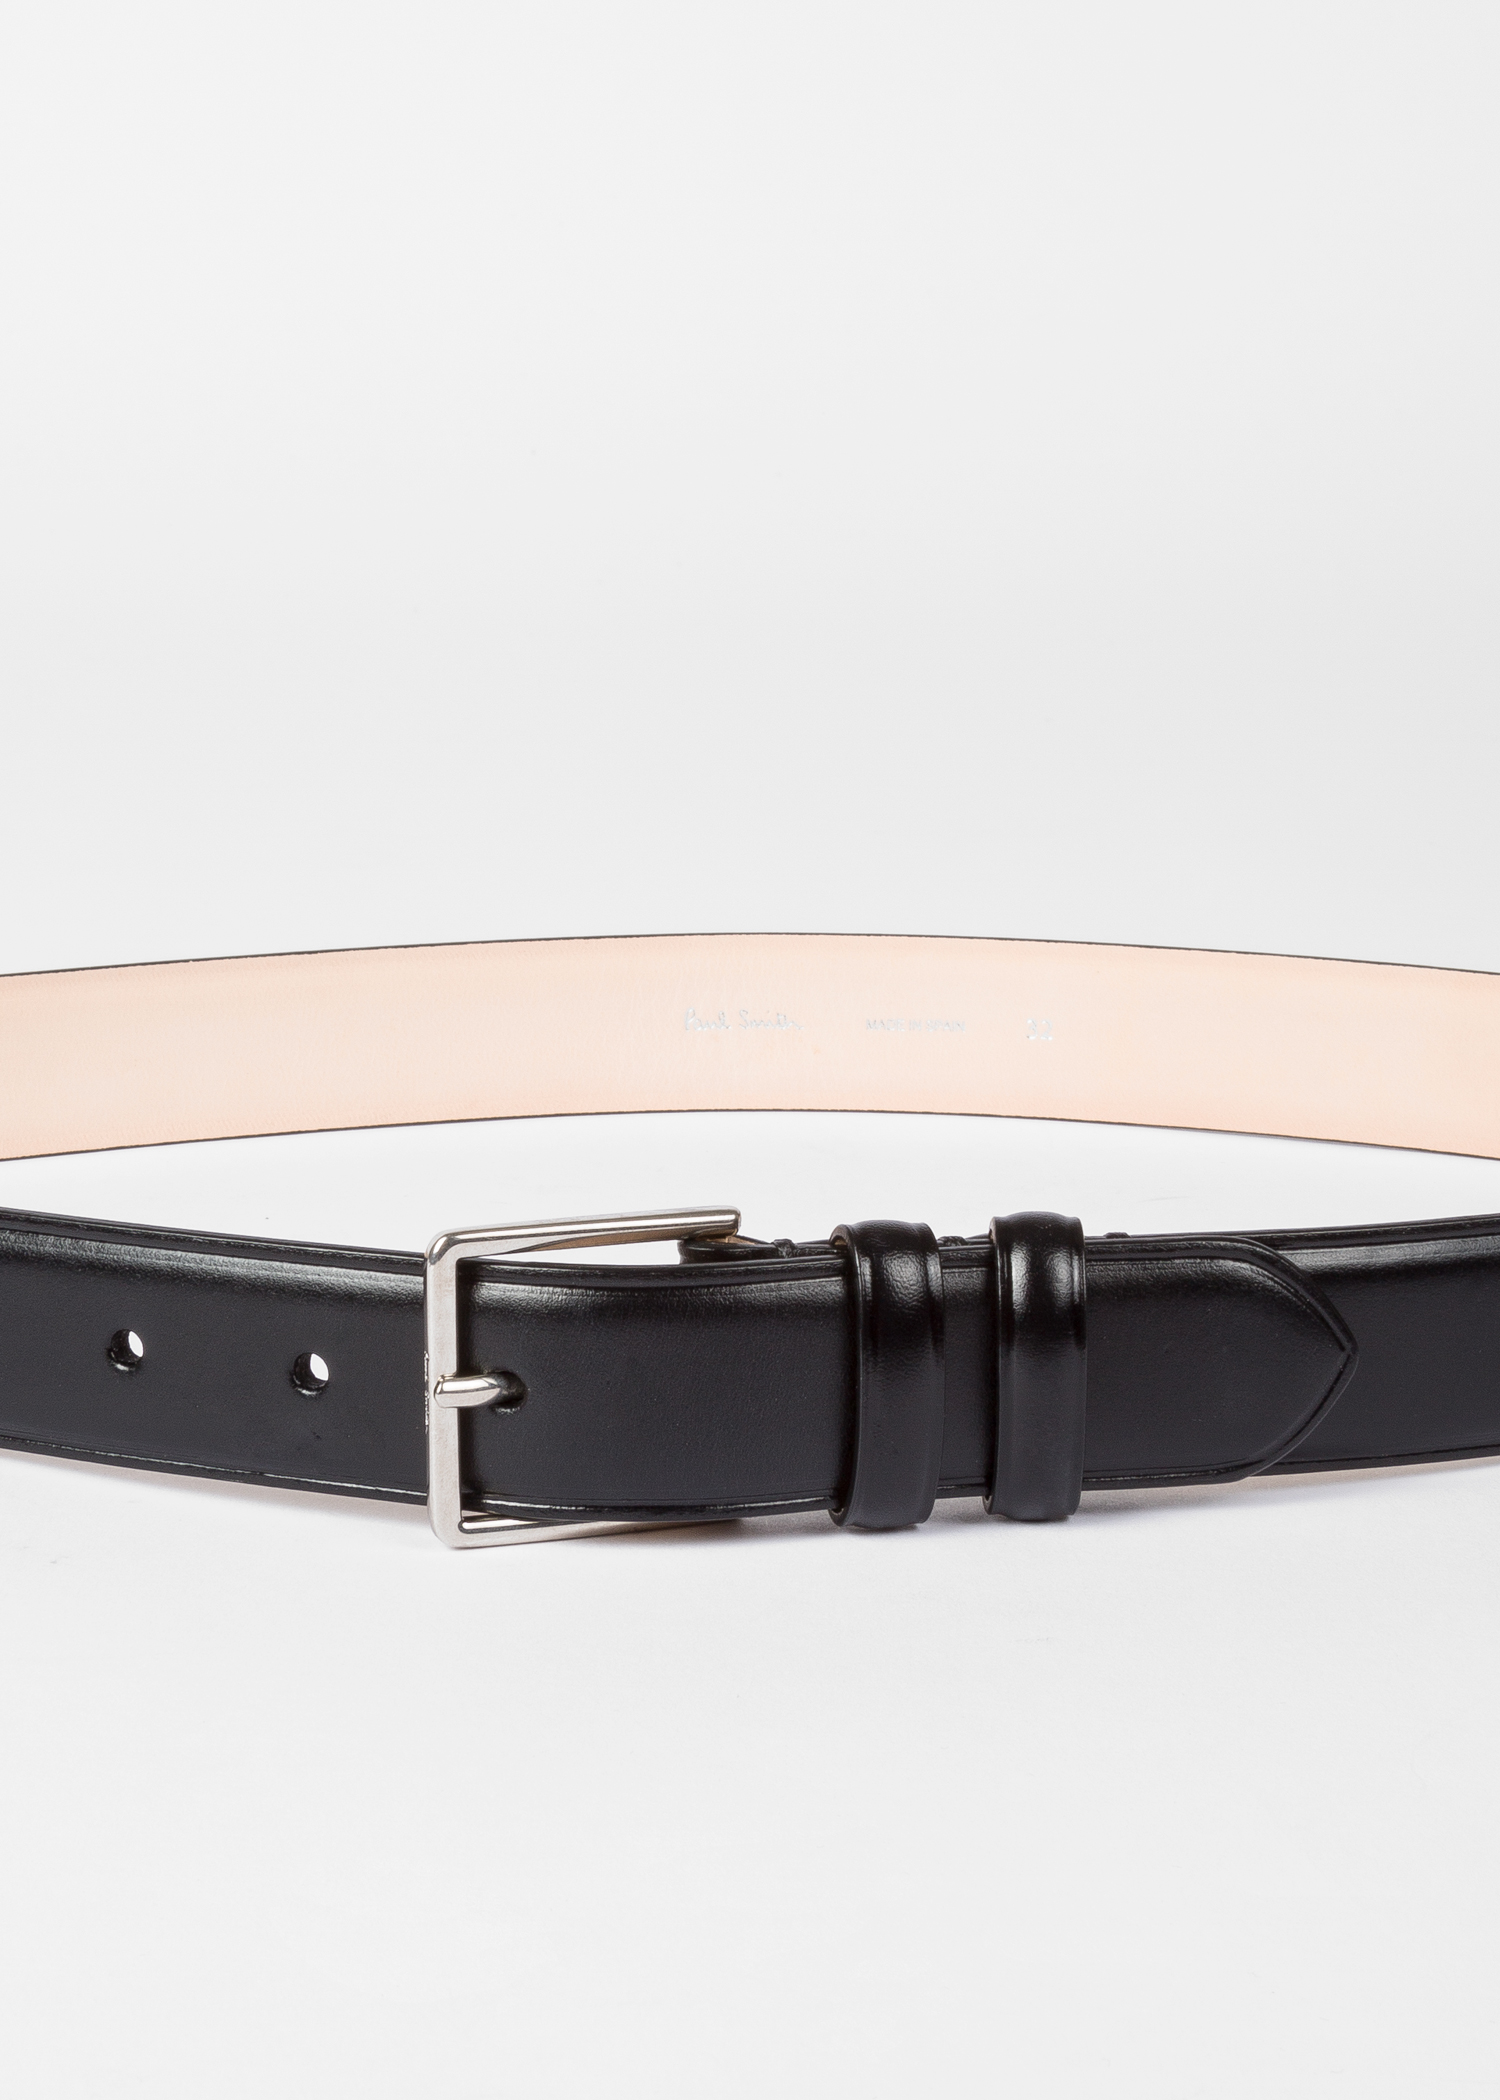 Men's Black Leather Double Keeper Classic Suit Belt by Paul Smith